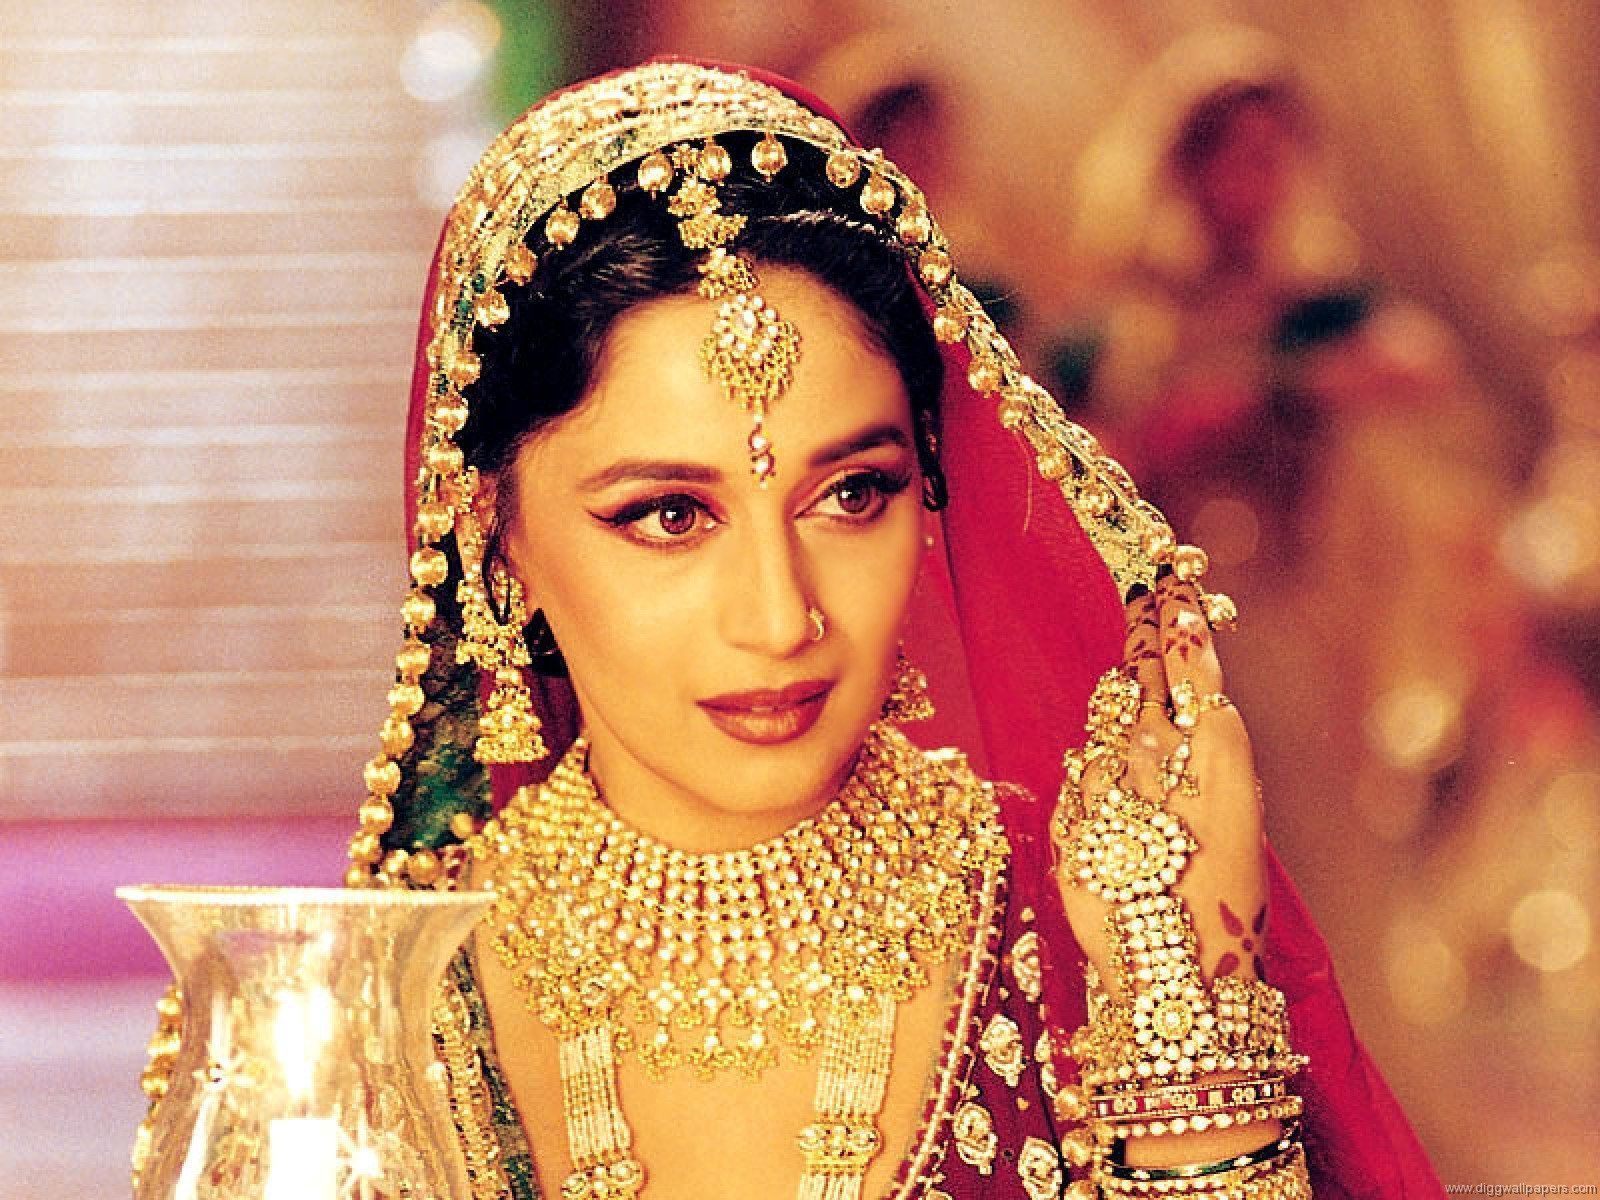 Happy birthday to the iconic Indian actress, Madhuri Dixit! 